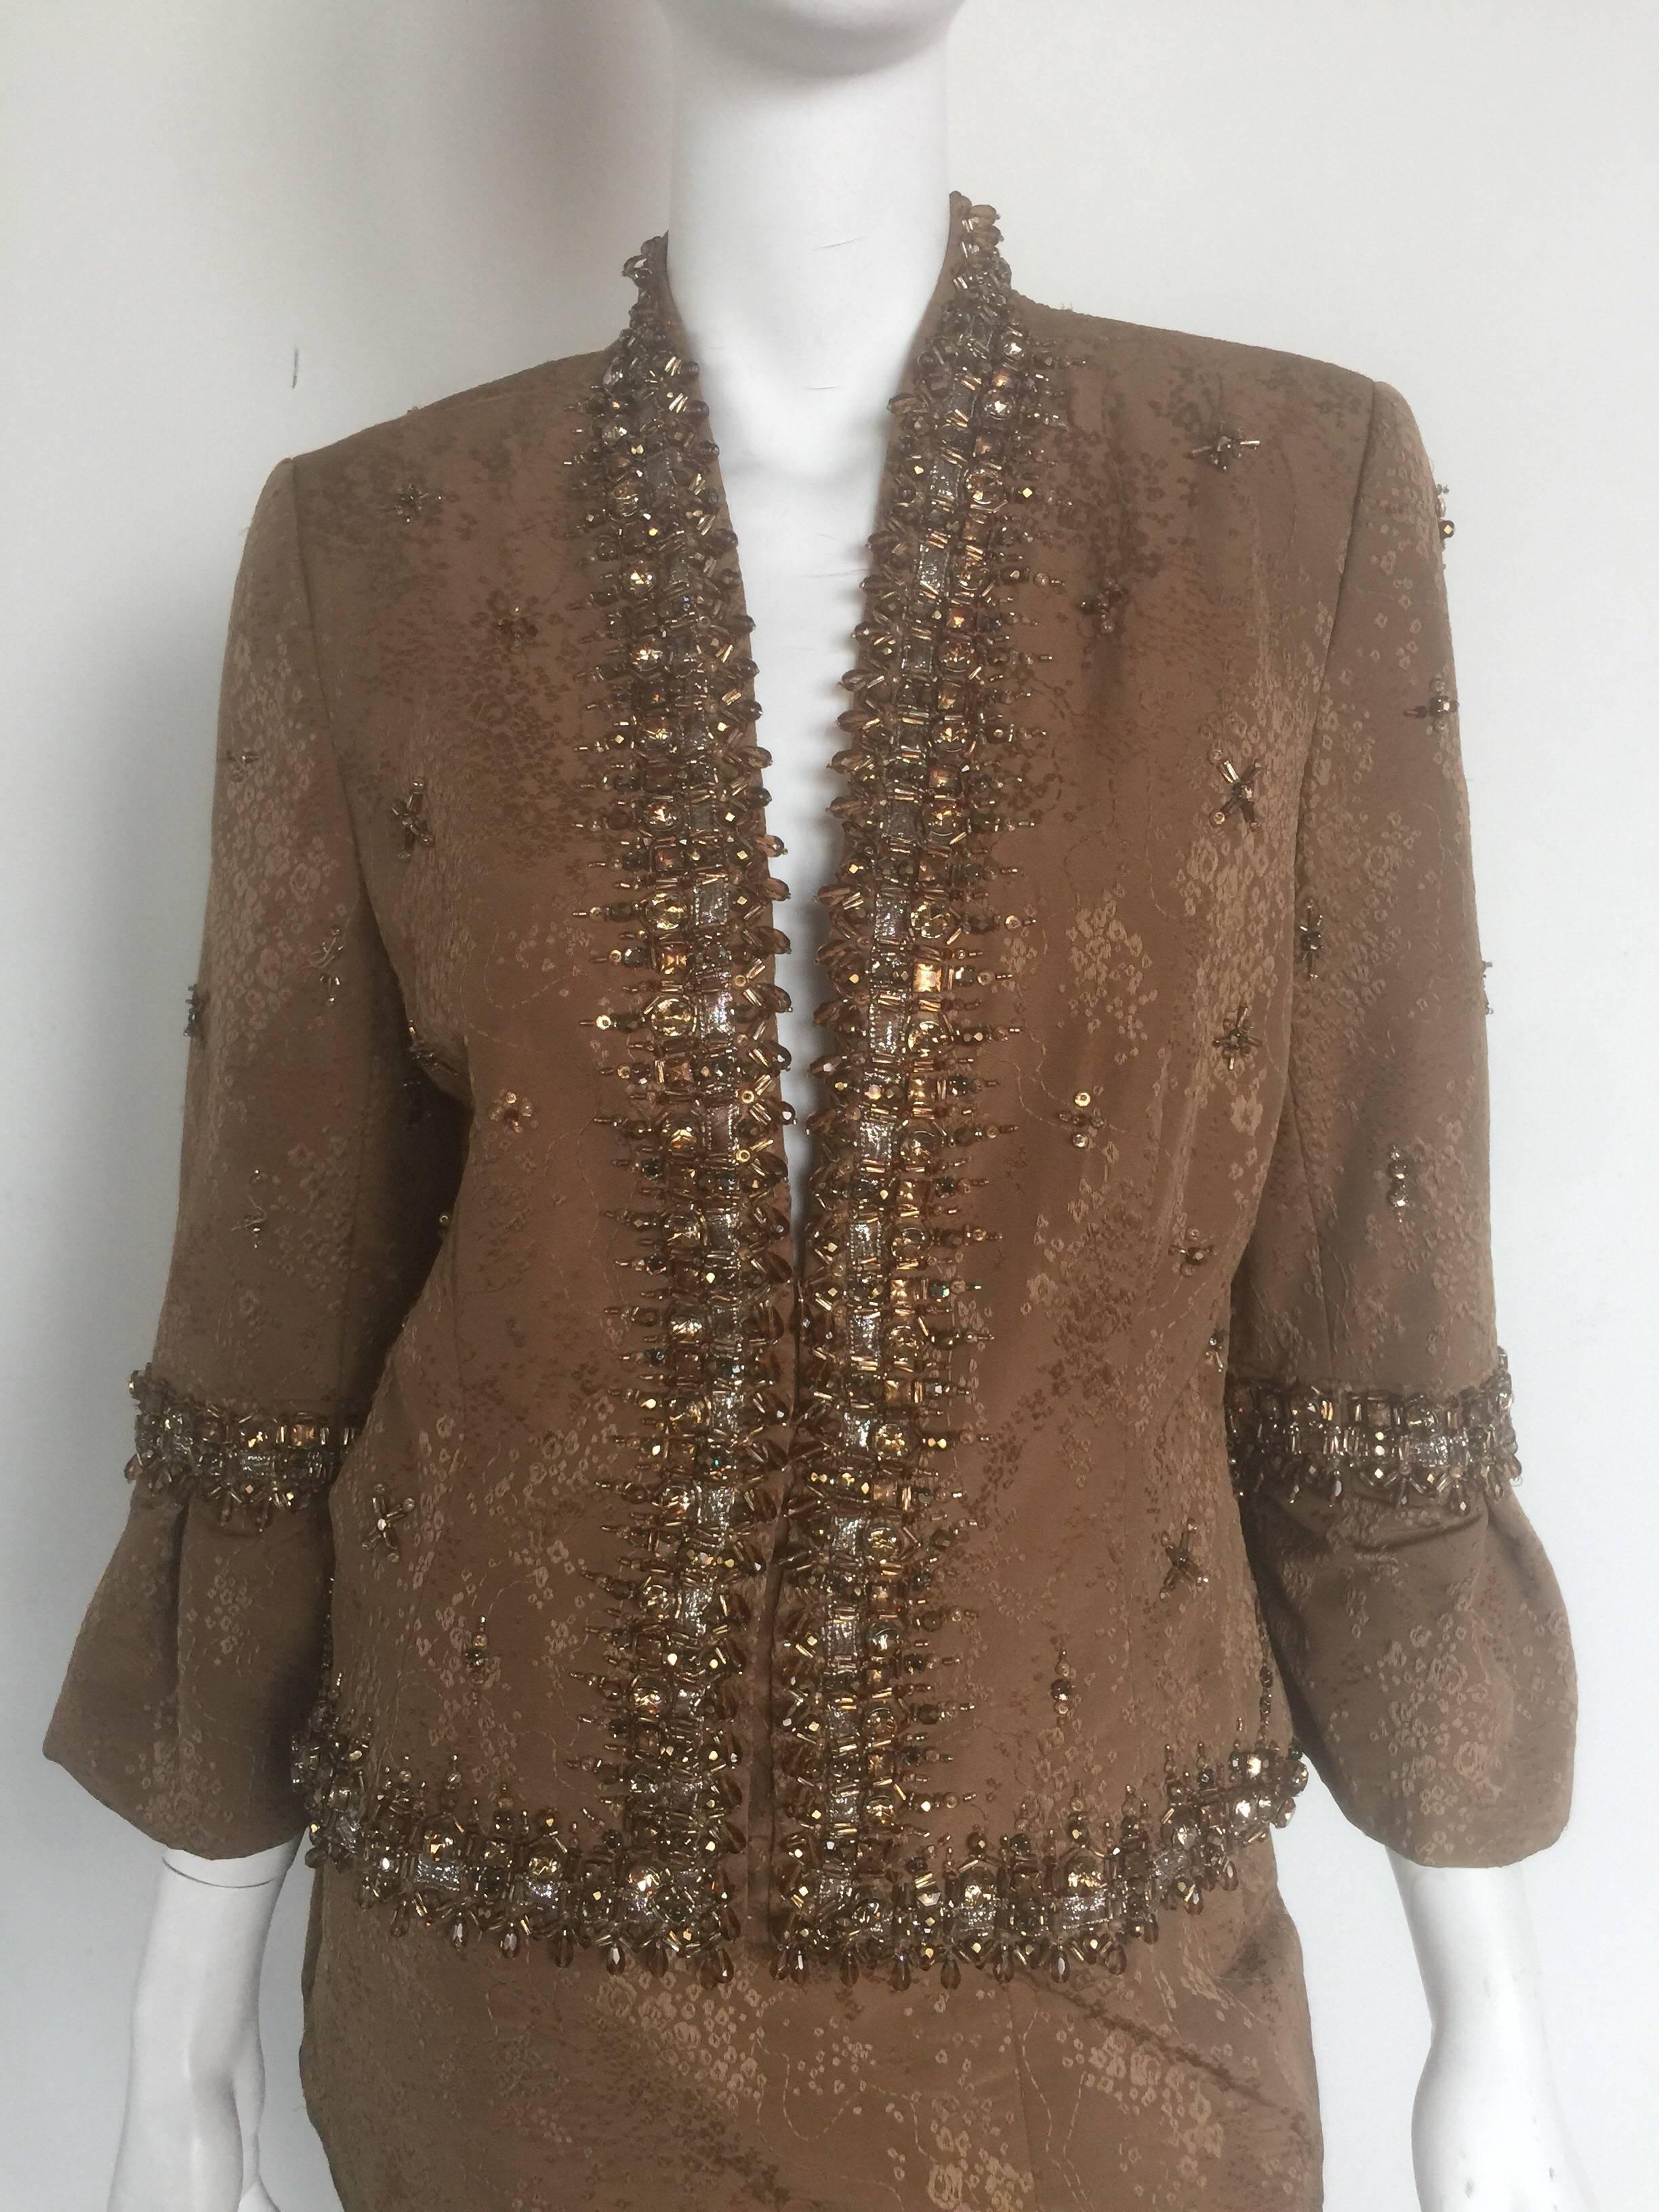 This two piece skirt suit is a bronze wool poly blend with beautiful bronze and gold crystal and beading details along the collar sleeves and all over the jacket.  The skirt is a US 10 and the Jacket is a US12.  This is a beautiful set together or